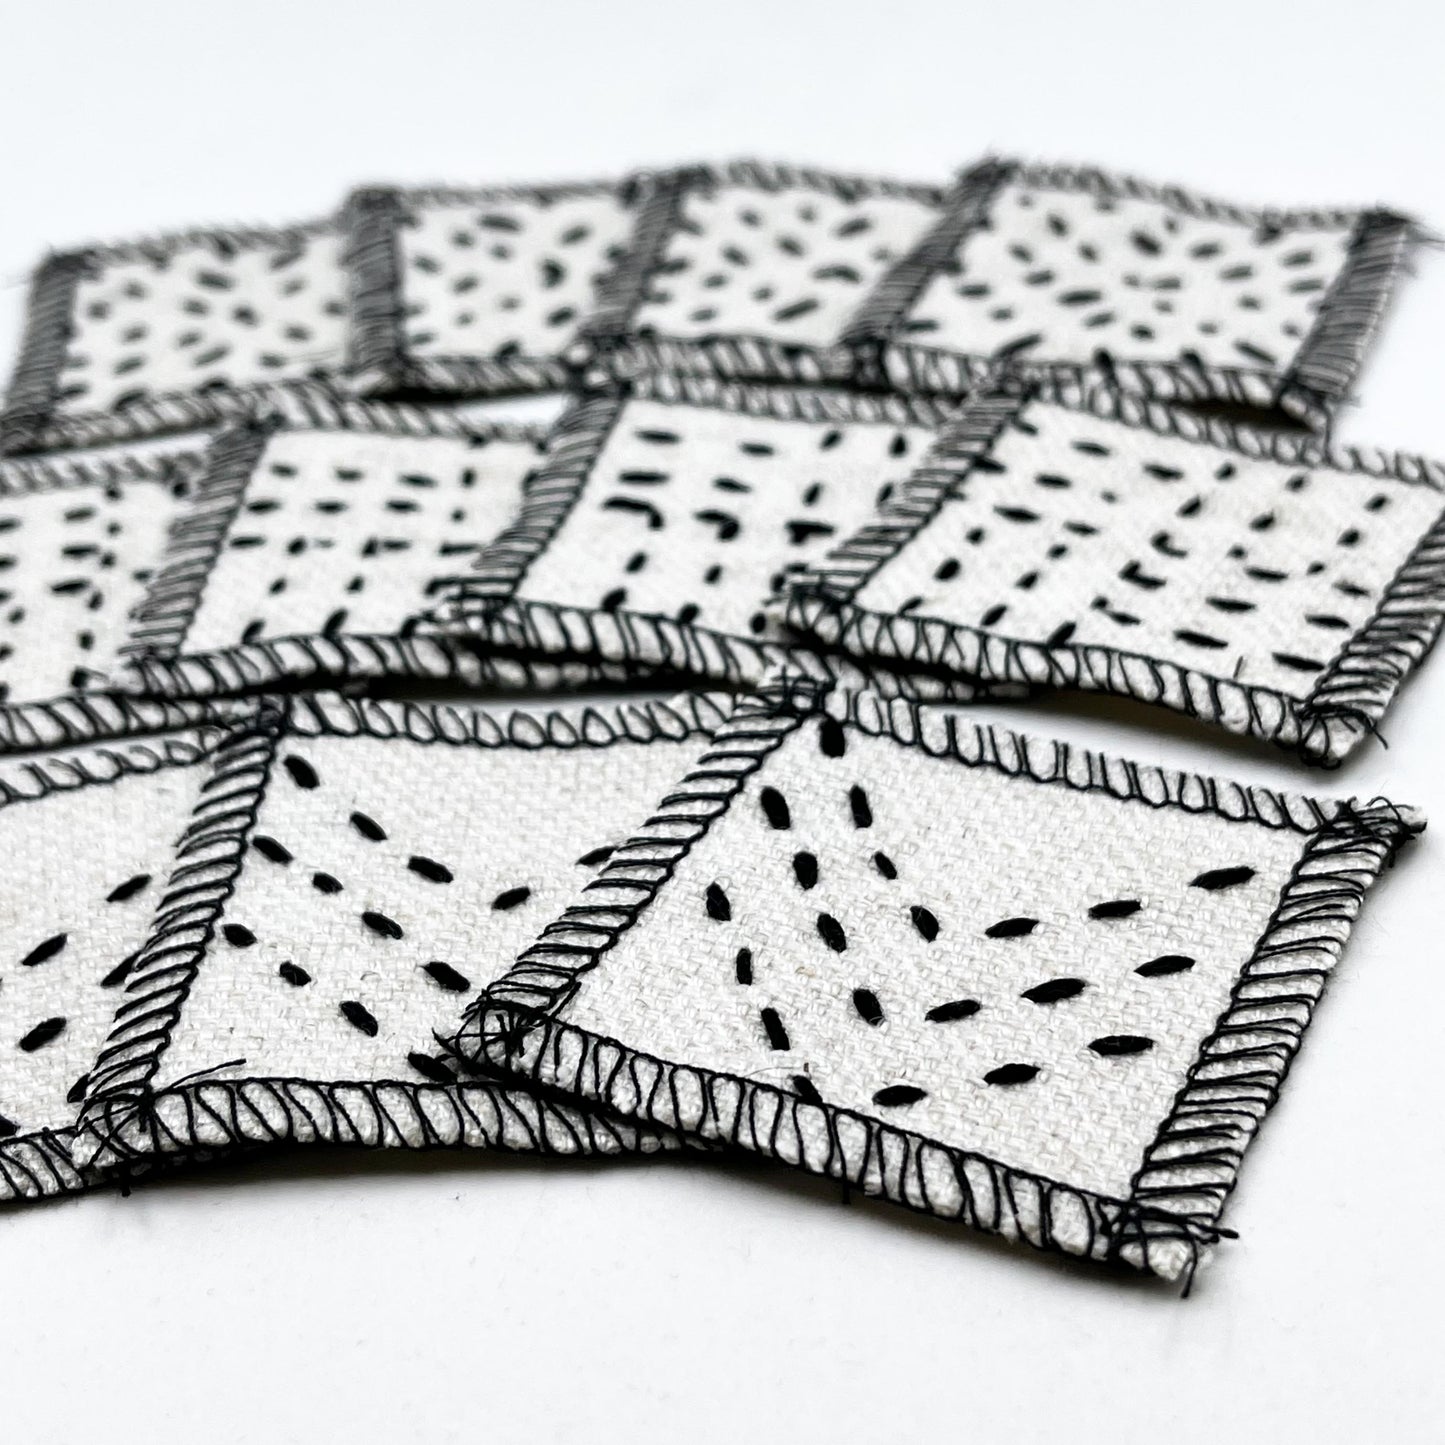 group of eleven square natural colored patches with stitching in black of different patterns, next to a stamp for size comparison